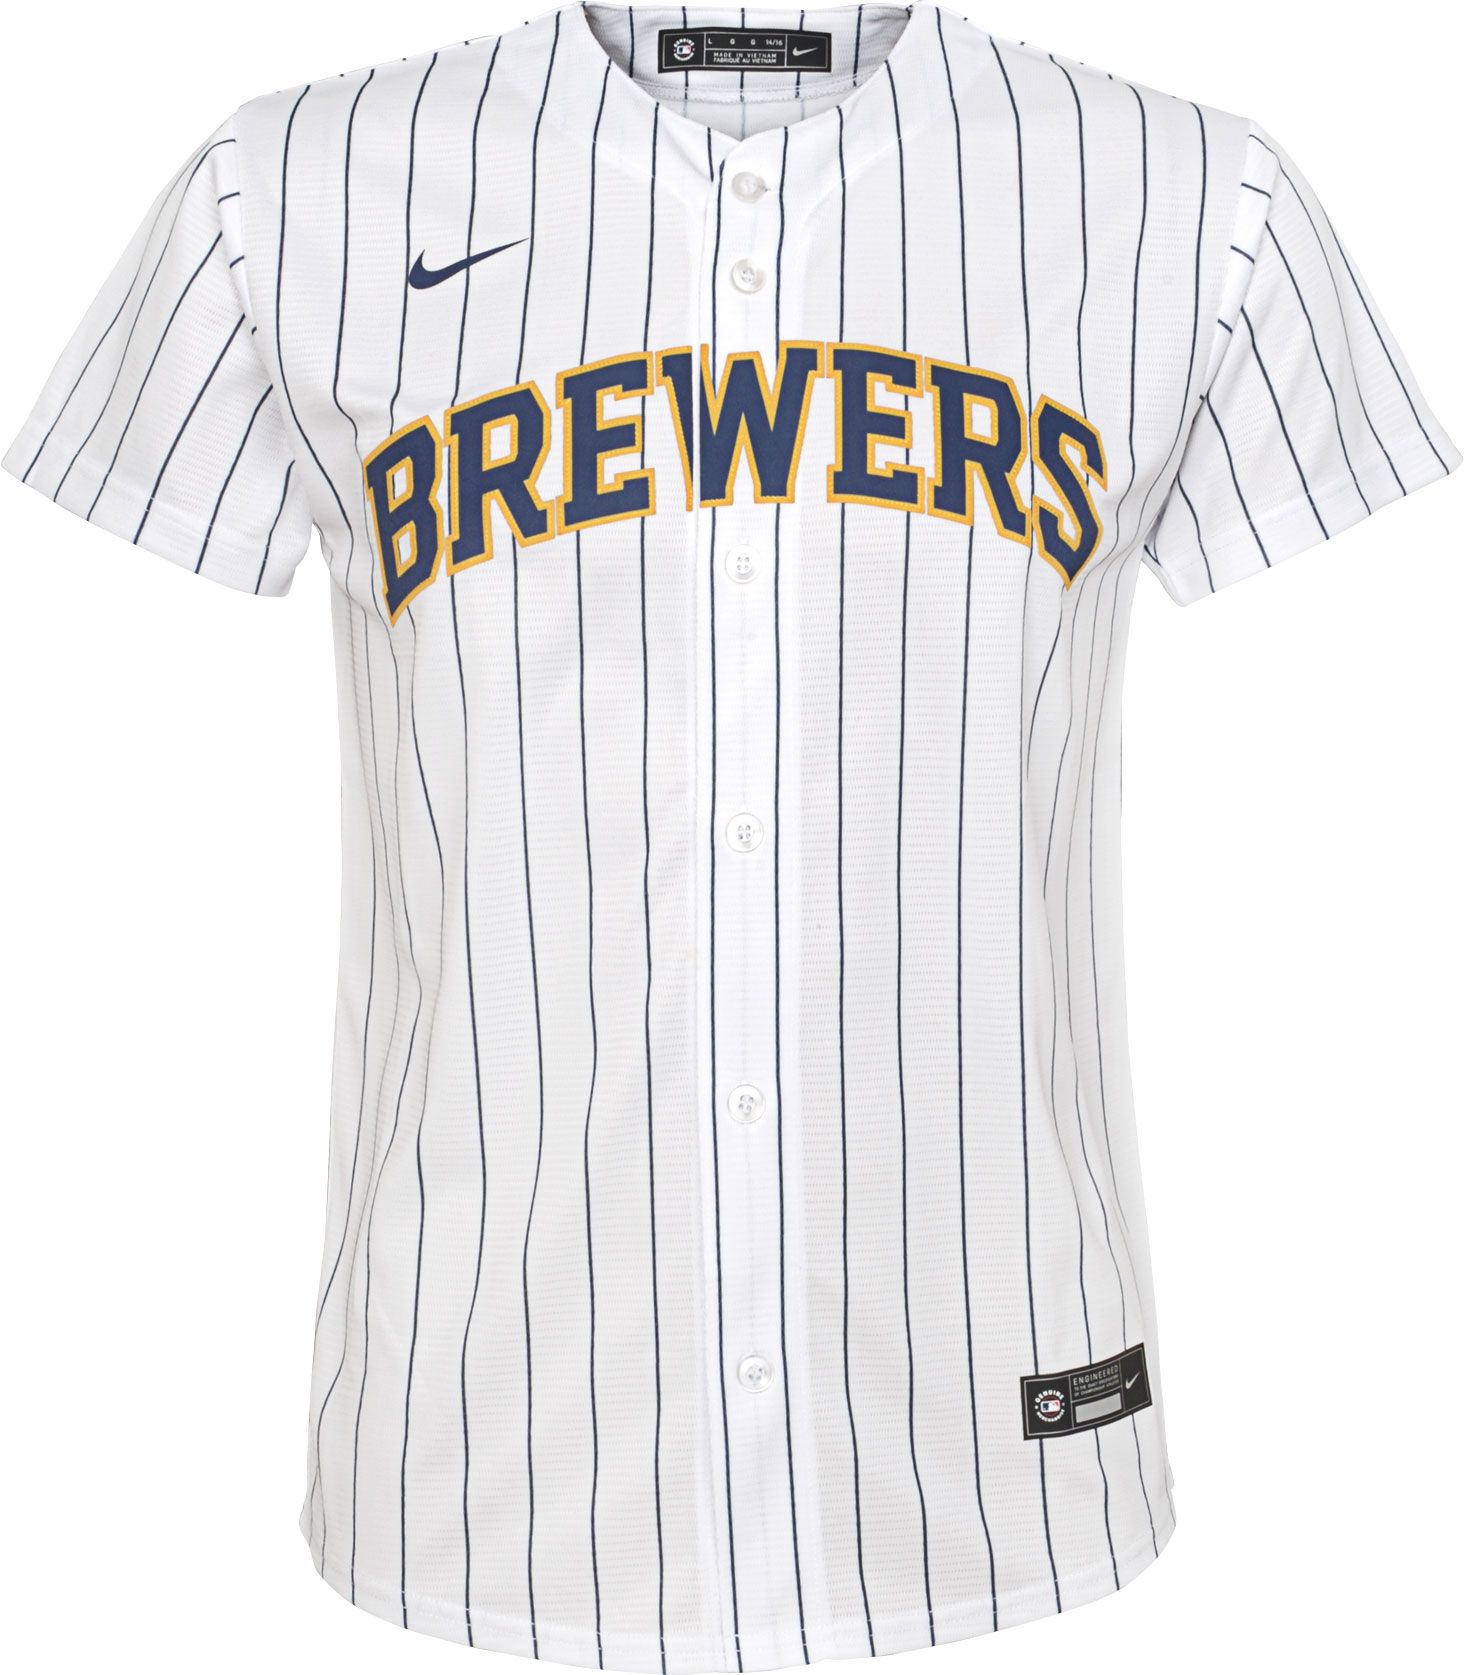 willy adames brewers jersey